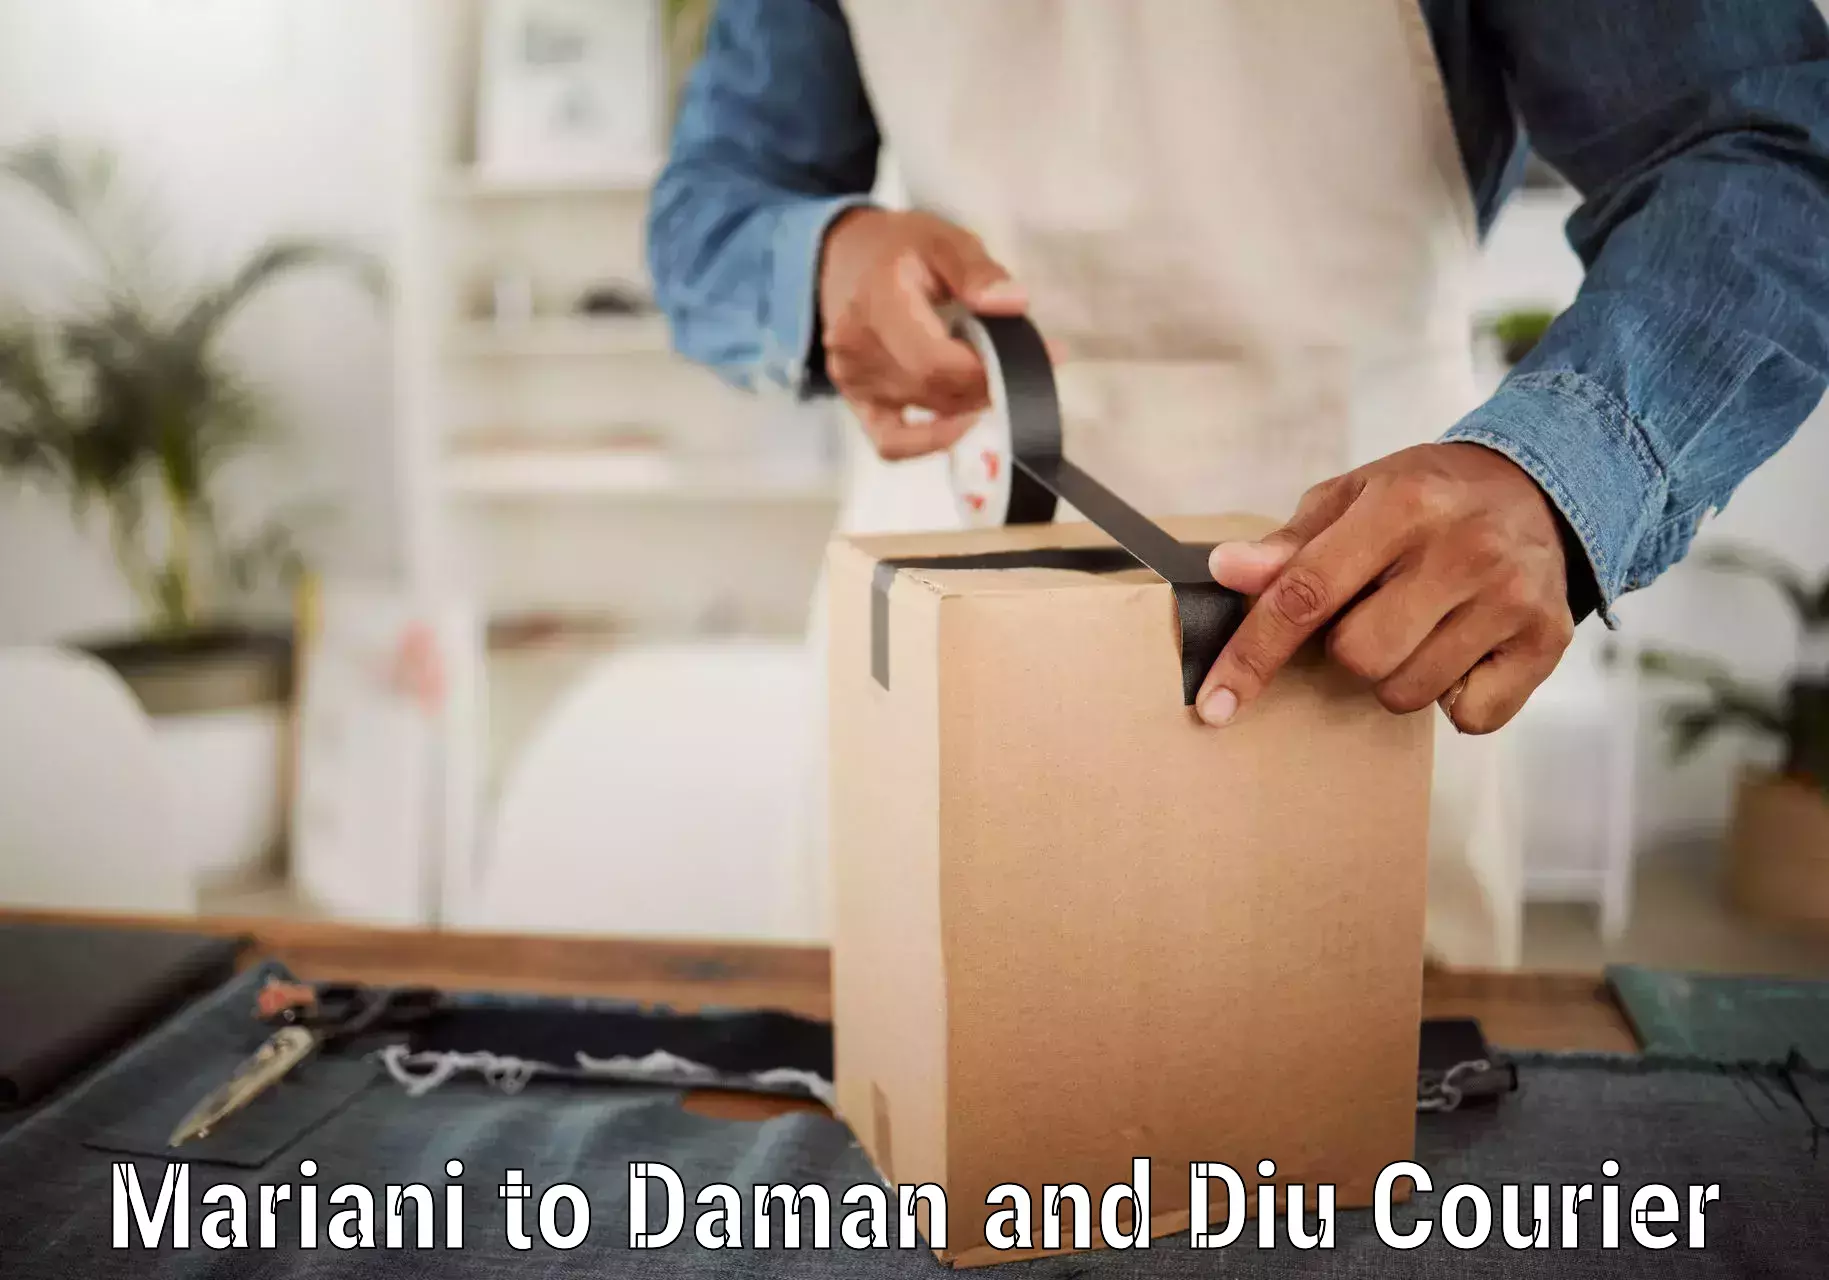 Nationwide courier service Mariani to Daman and Diu